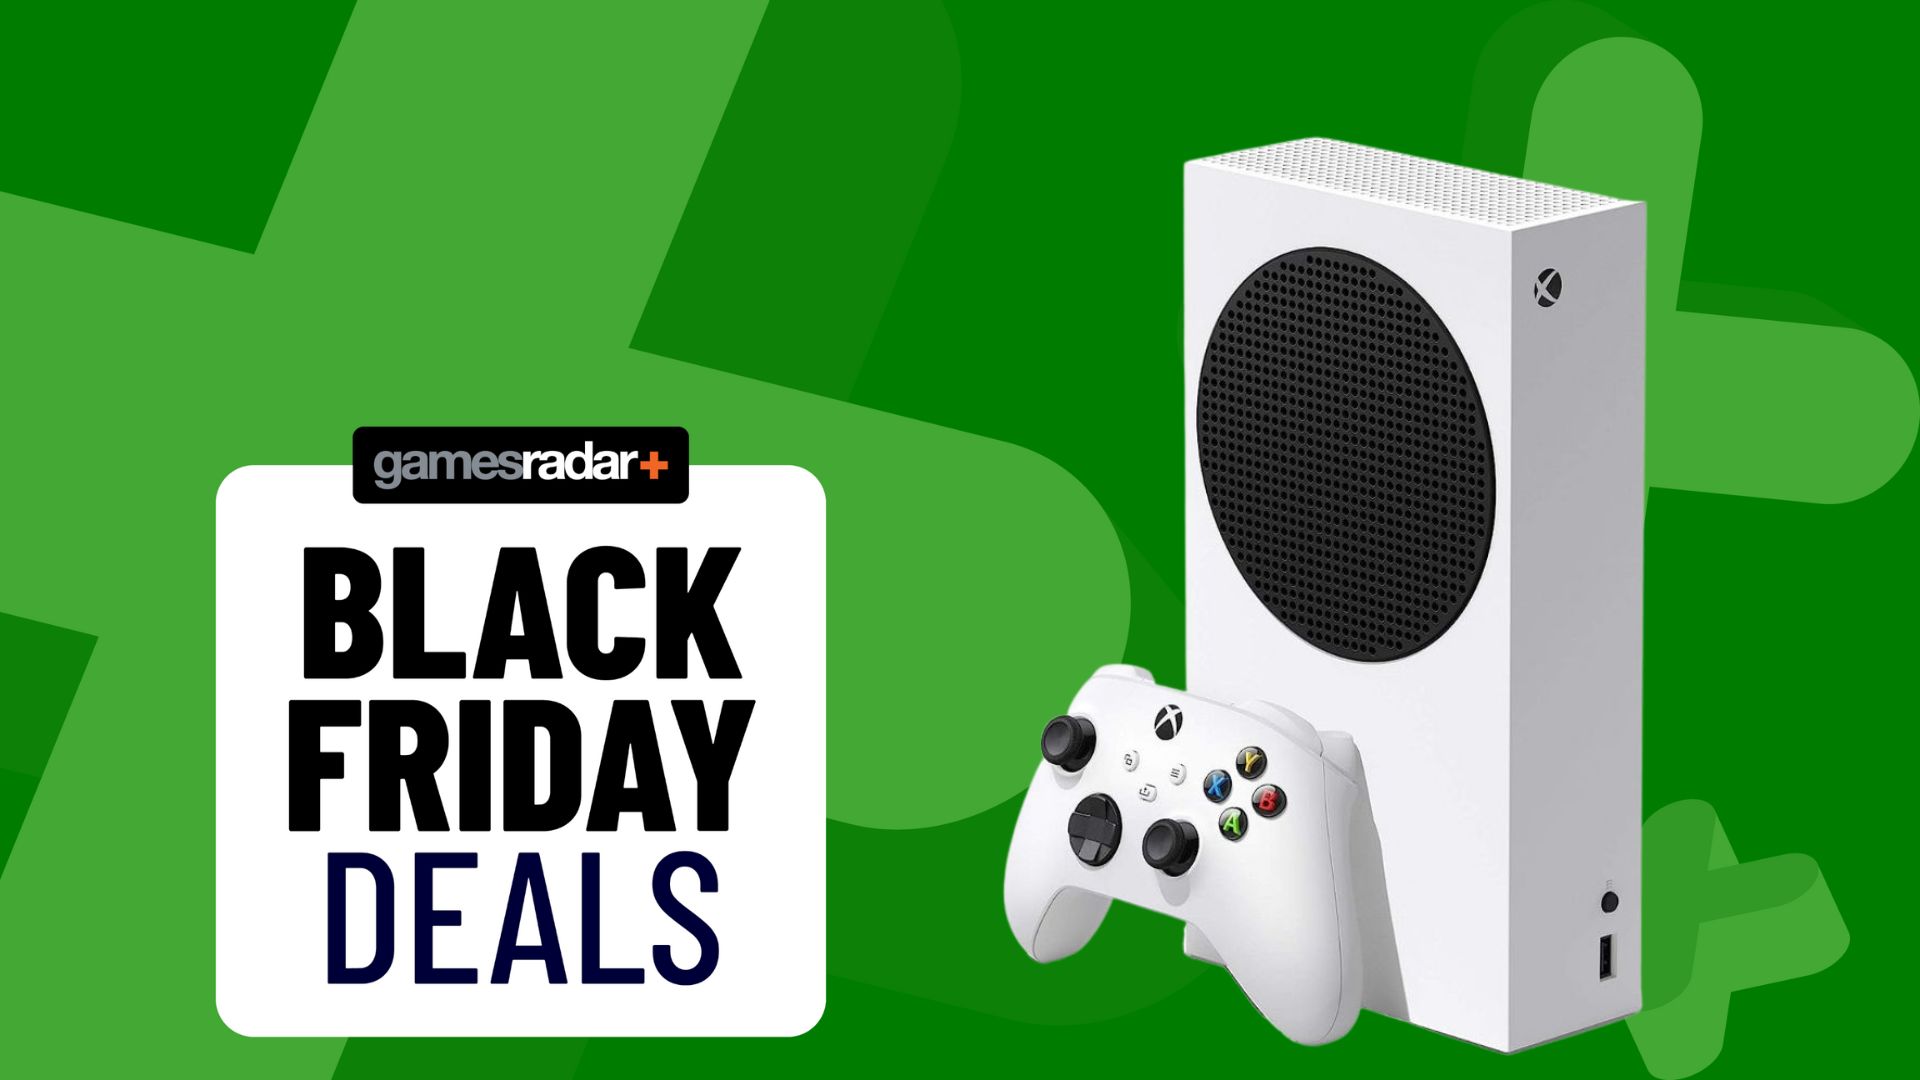 Too busy for gaming these days? This Black Friday Xbox deal could help ...